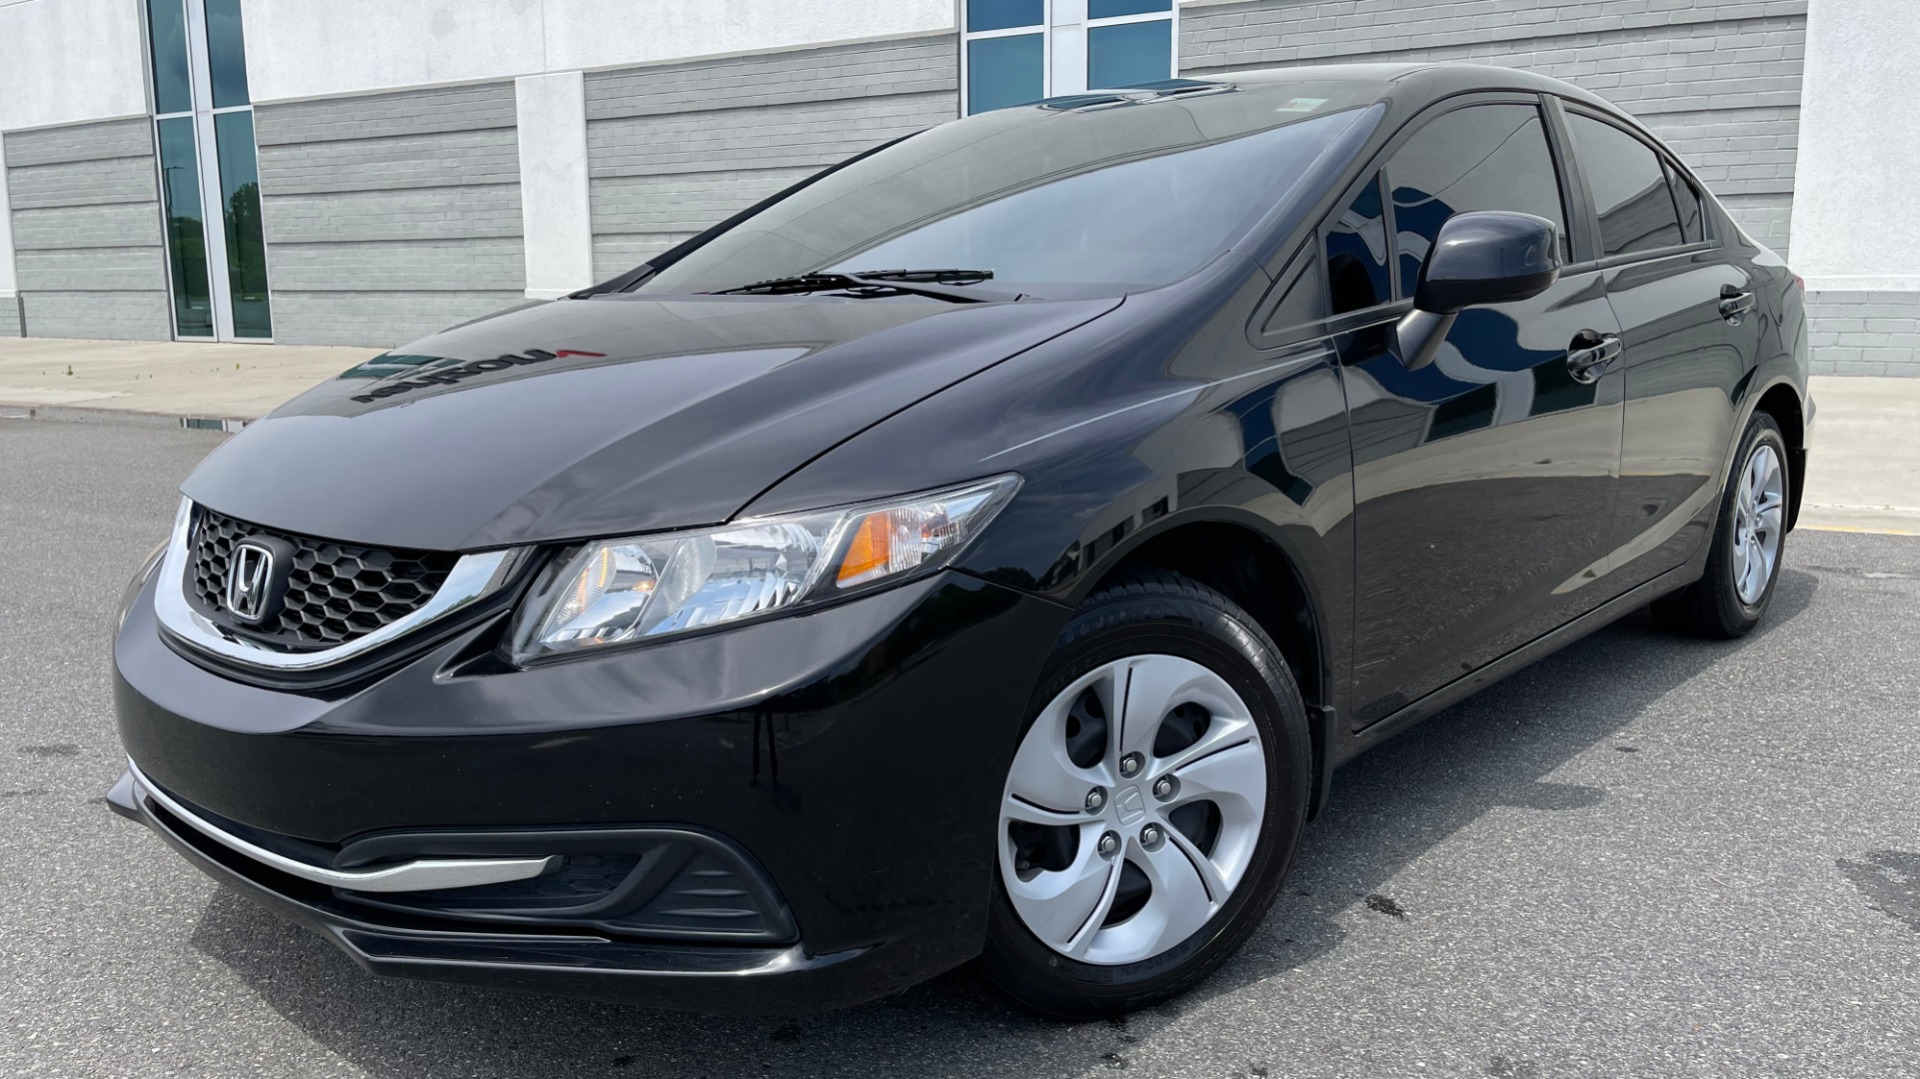 Used 2013 Honda CIVIC SEDAN LX / 5-SPD AUTO / 1.8L 4-CYL / BLUETOOTH / AIR CONDITIONING for sale Sold at Formula Imports in Charlotte NC 28227 1